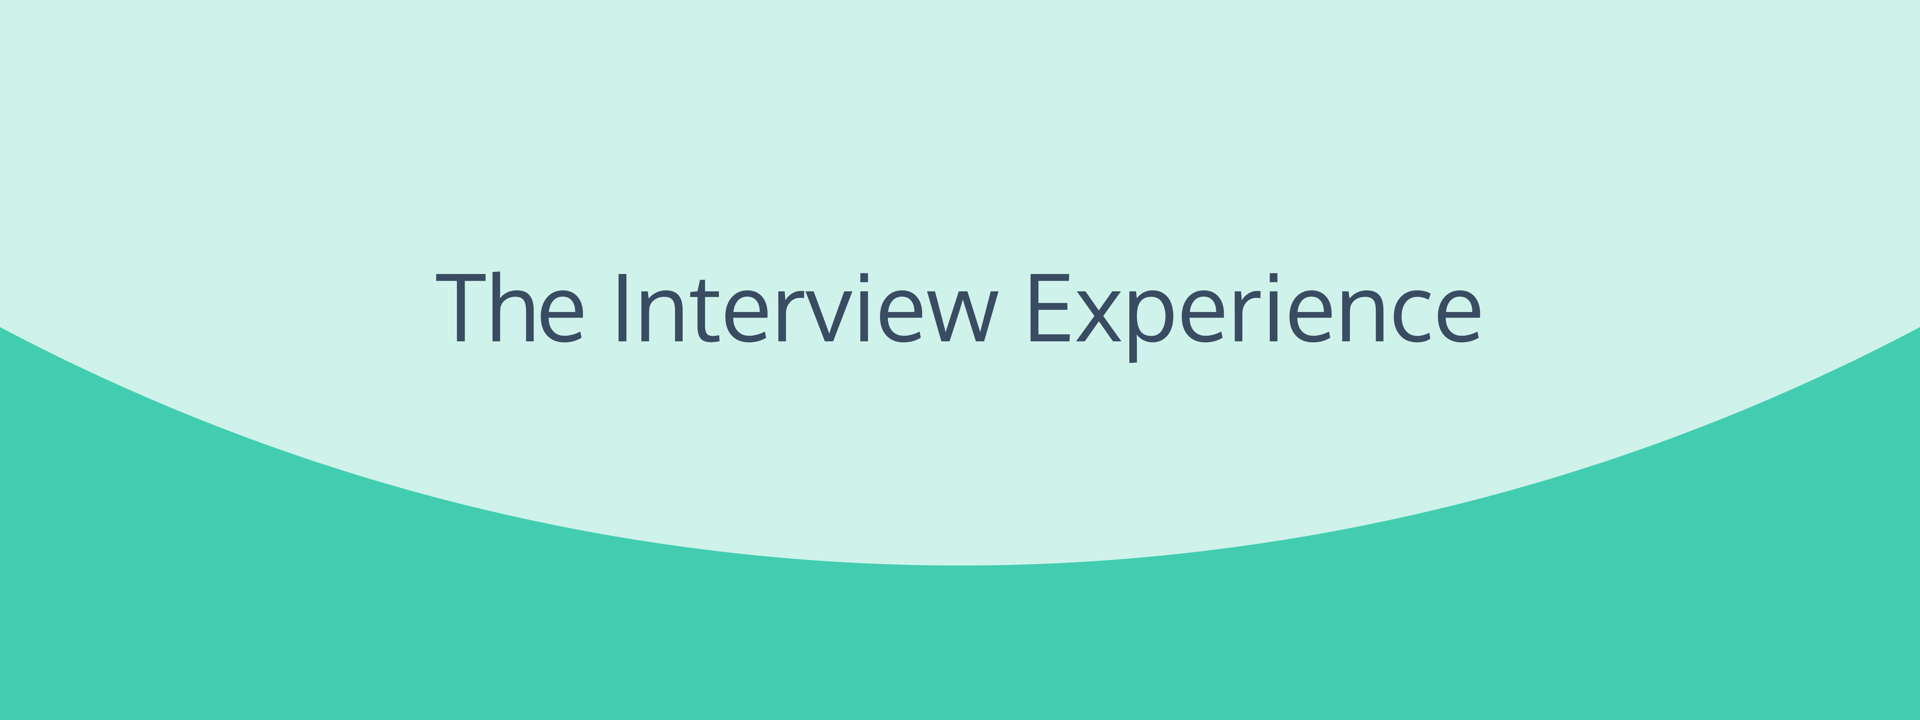 The Interview Experience